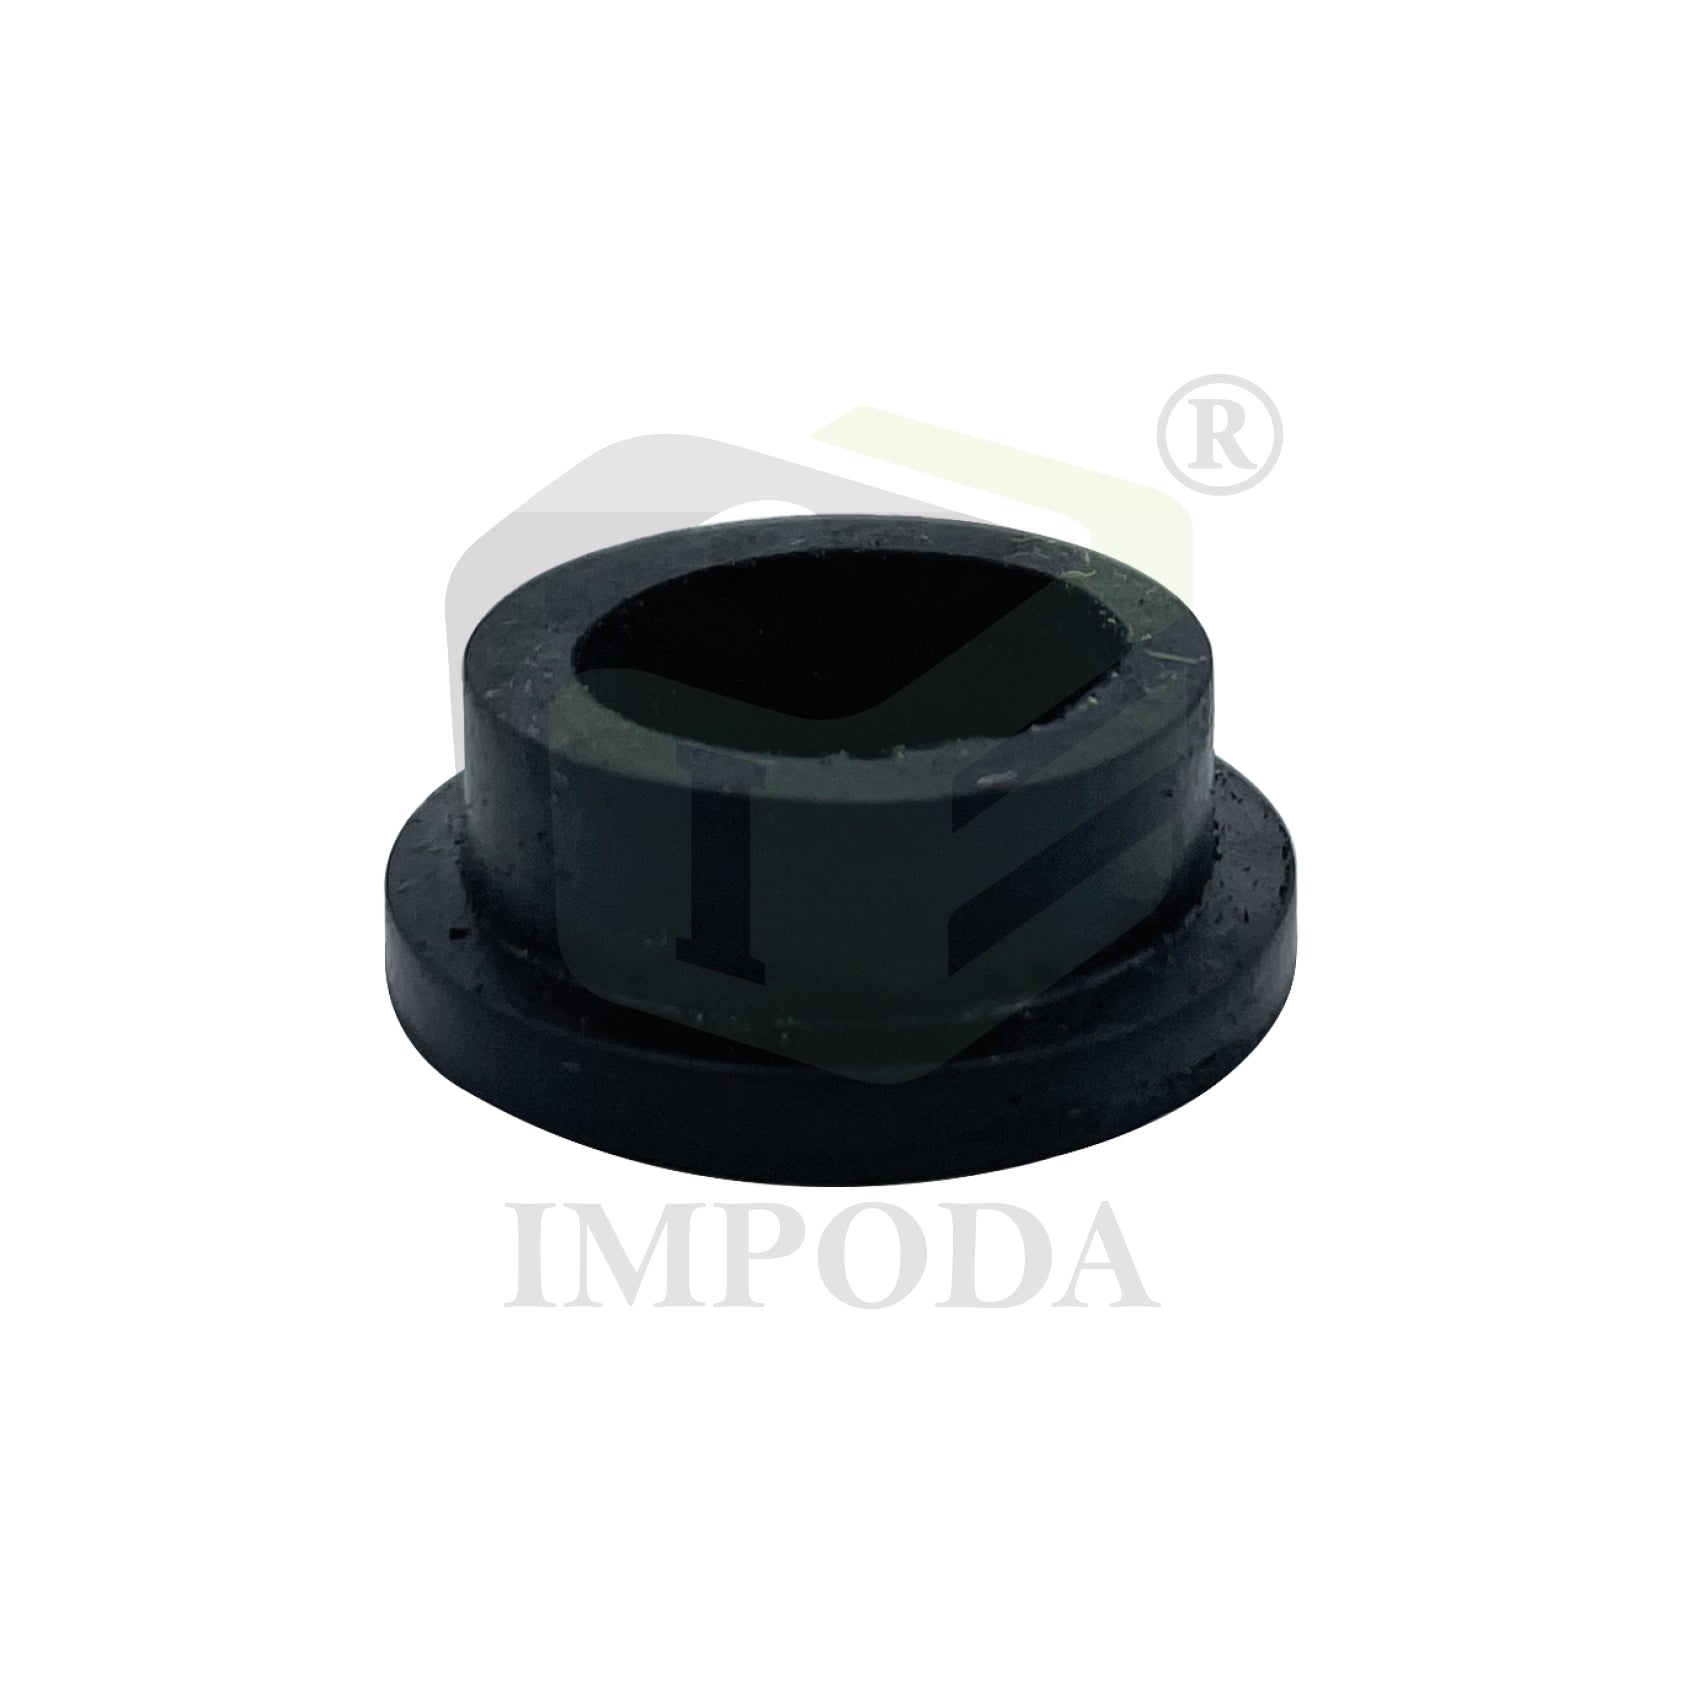 Wall Mixer Step Washer/IMP-6069